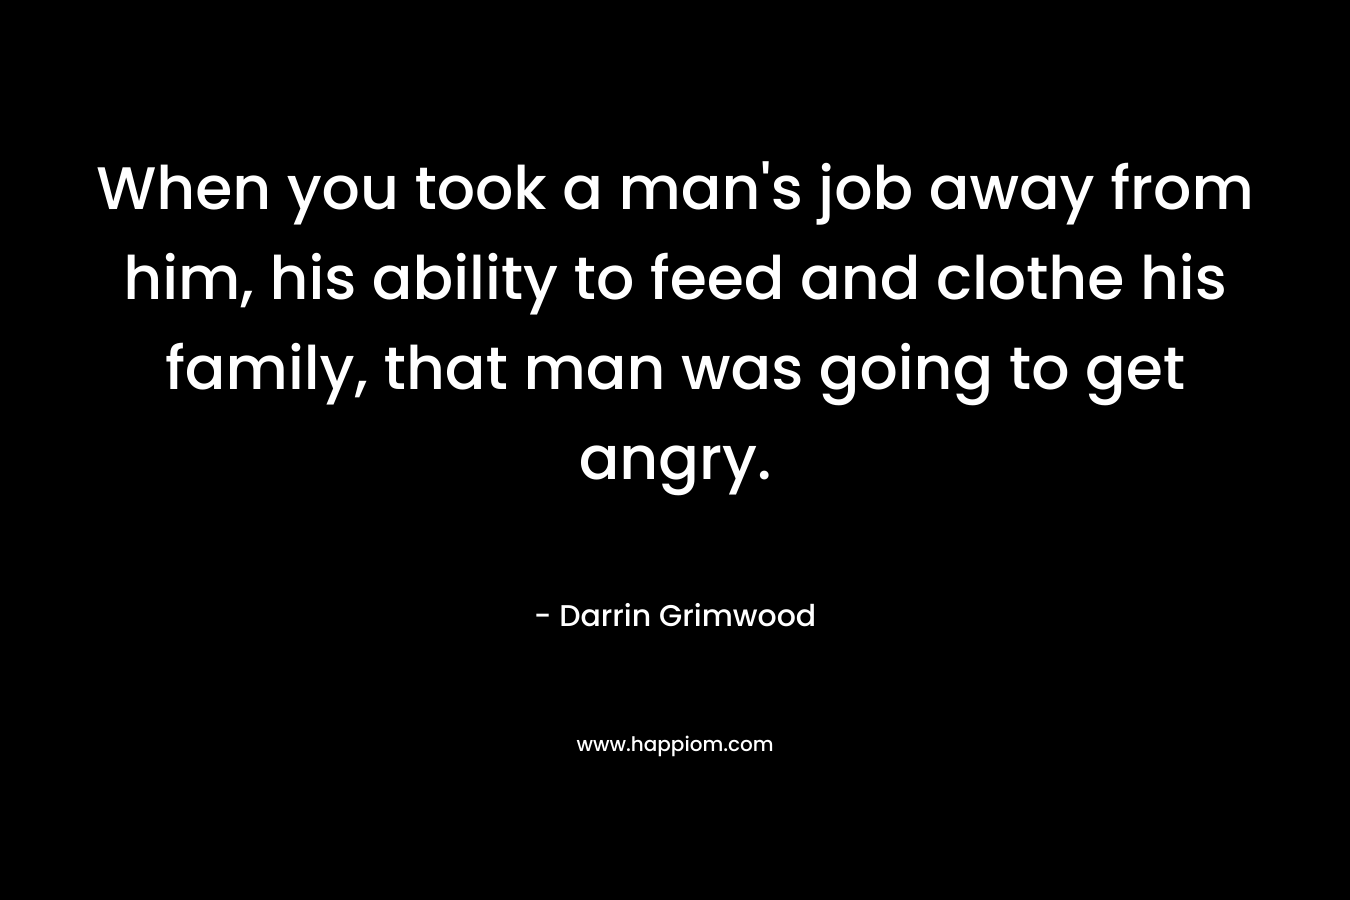 When you took a man’s job away from him, his ability to feed and clothe his family, that man was going to get angry. – Darrin Grimwood